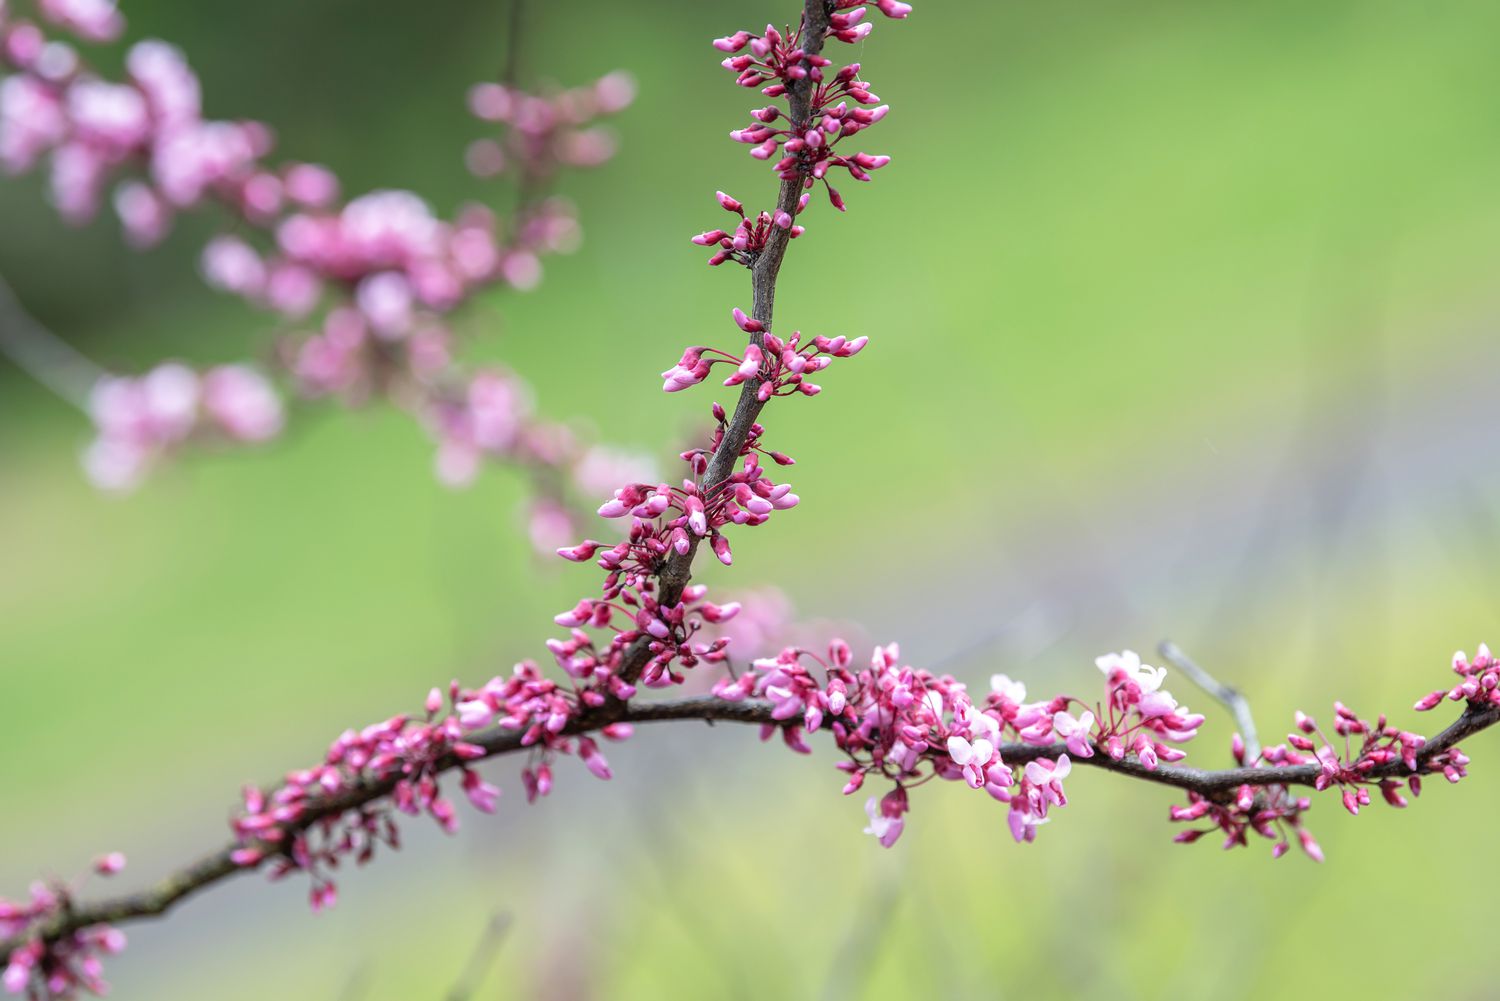 Forest pansy redbud tree branch with tiny pink flower buds 